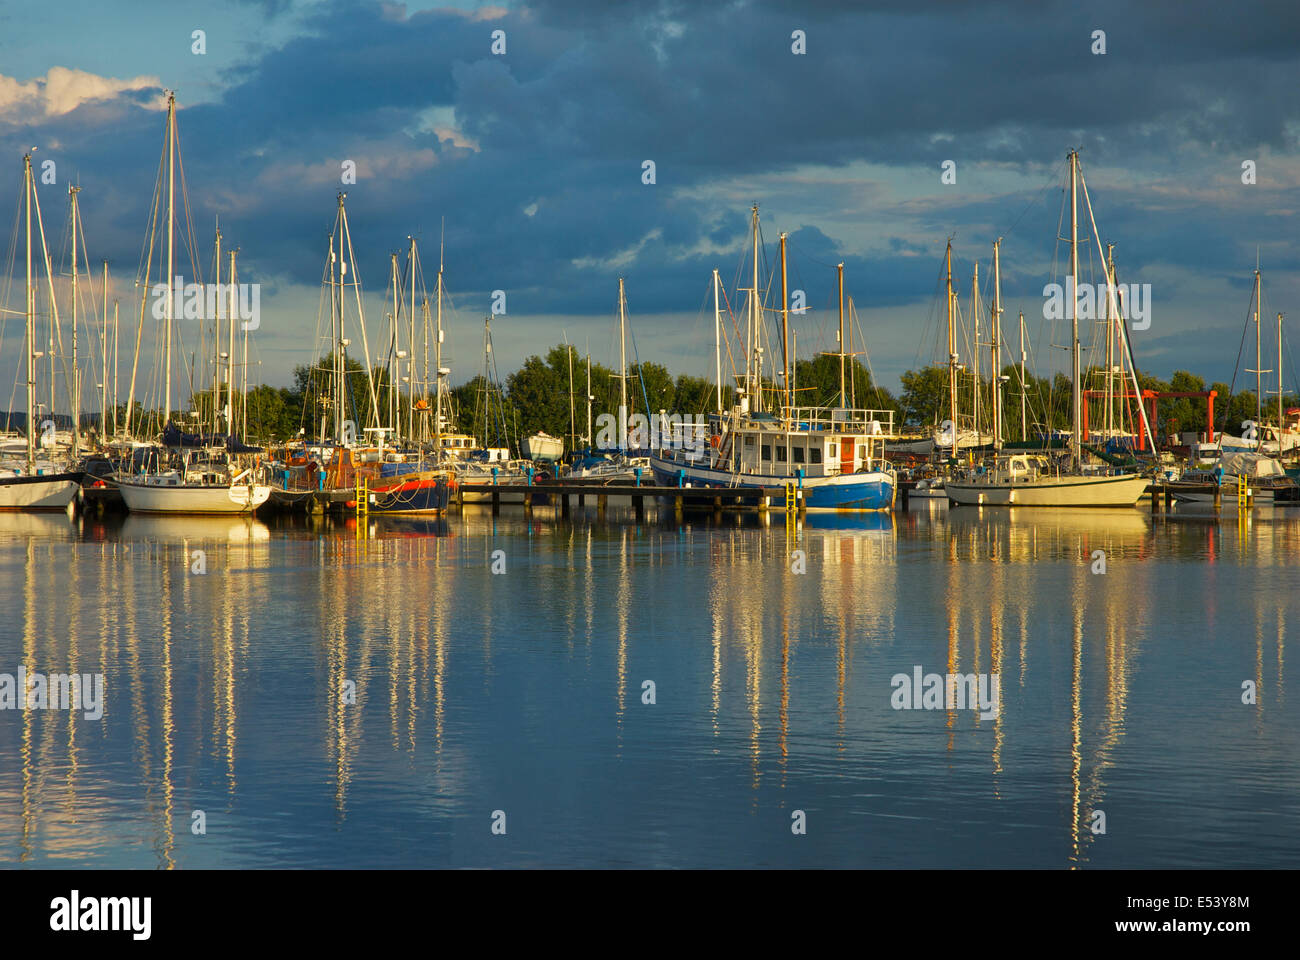 Sailing boats moored in the canal basin, Glasson Dock, Lancashire, England UK Stock Photo